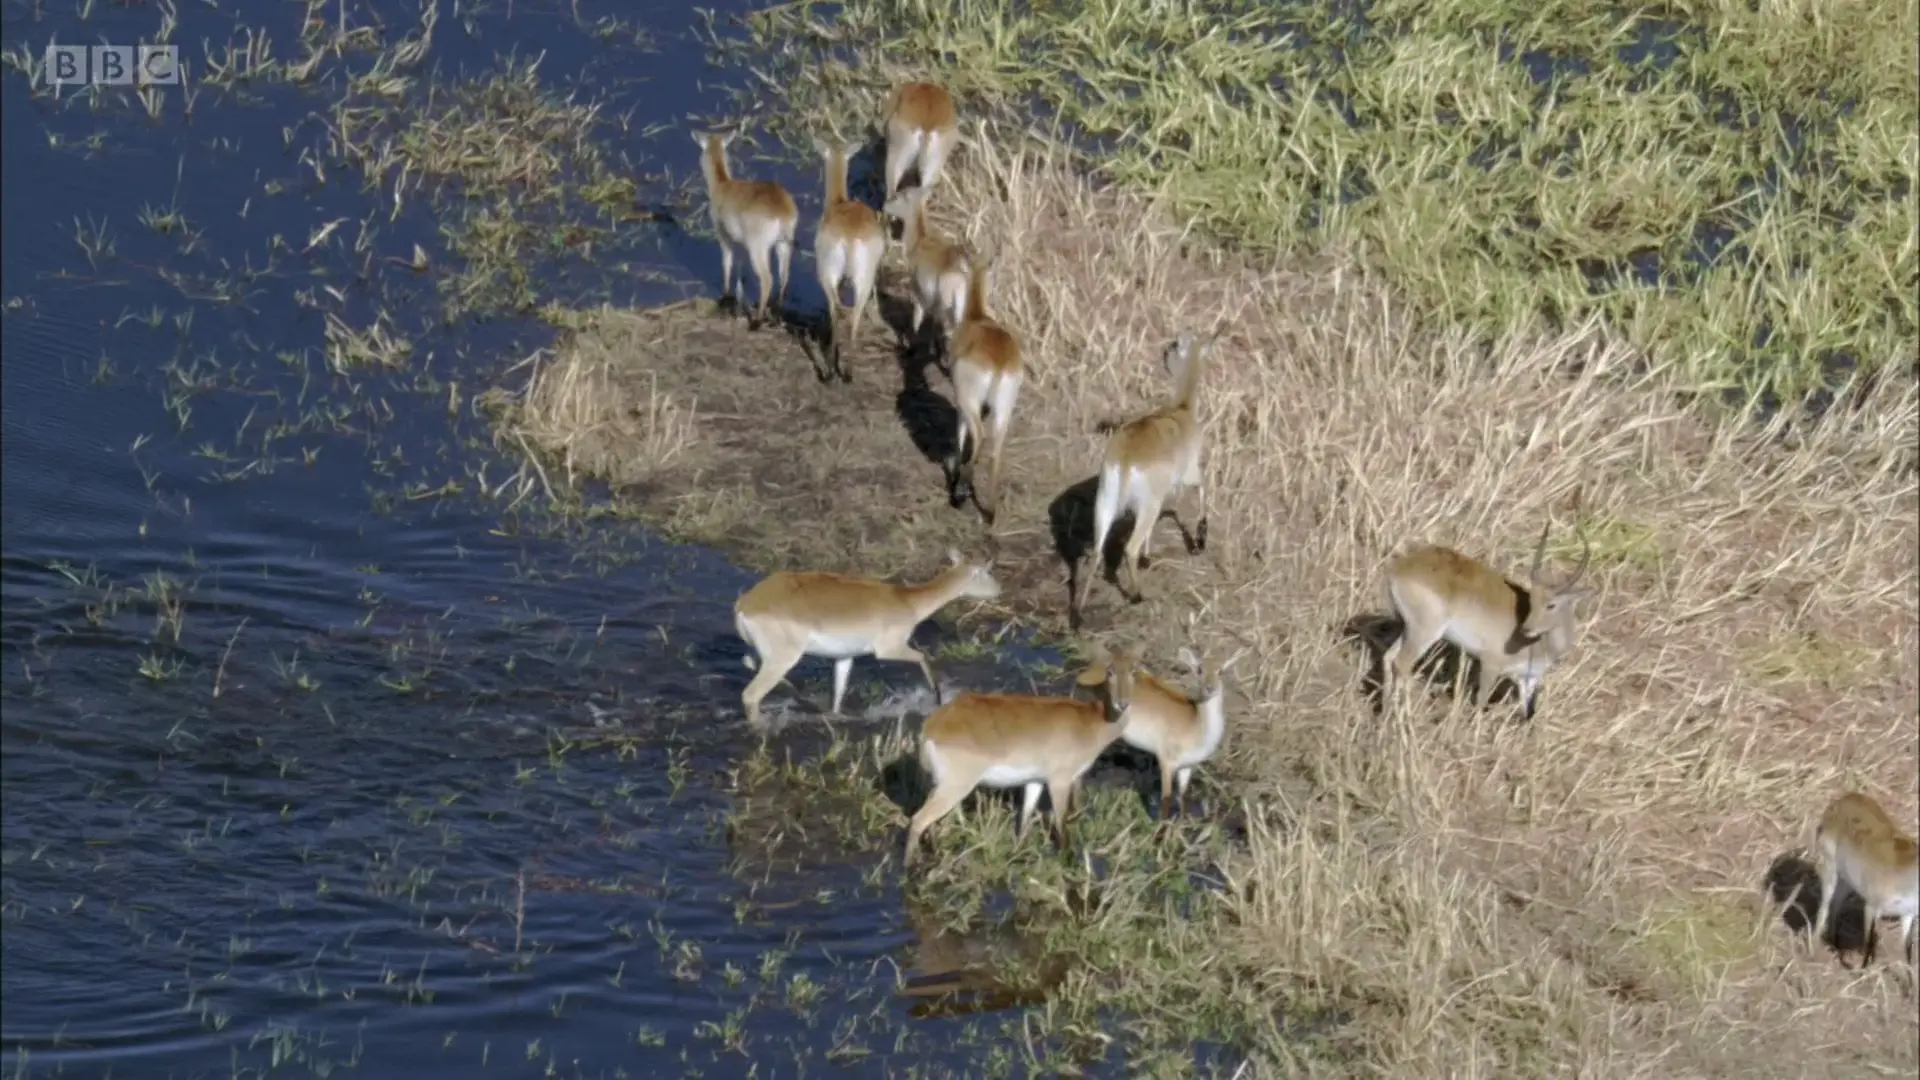 Red lechwe (Kobus leche leche) as shown in Planet Earth - From Pole to Pole